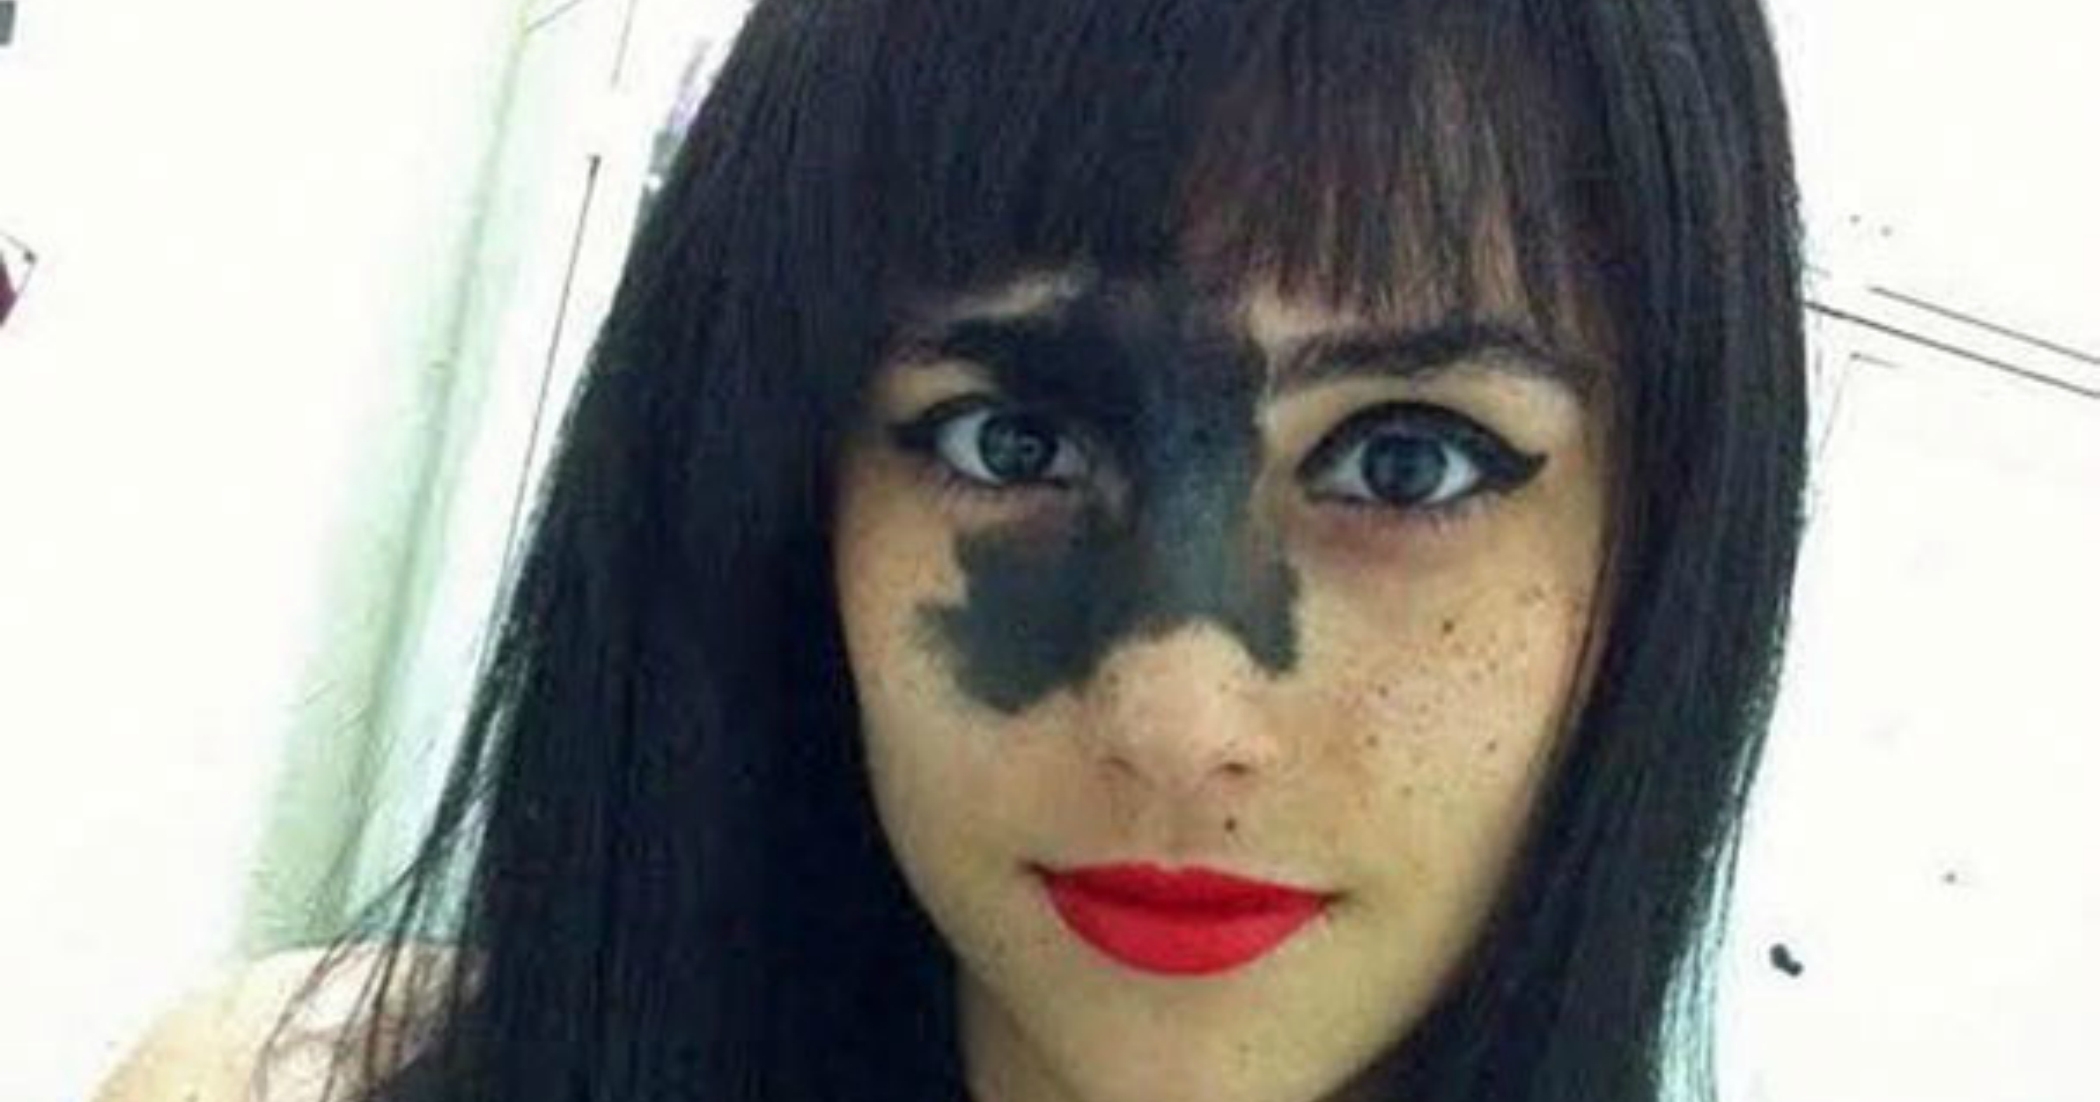 This Girls Rare Birthmark Looks Bizarre To People But She Proved That 